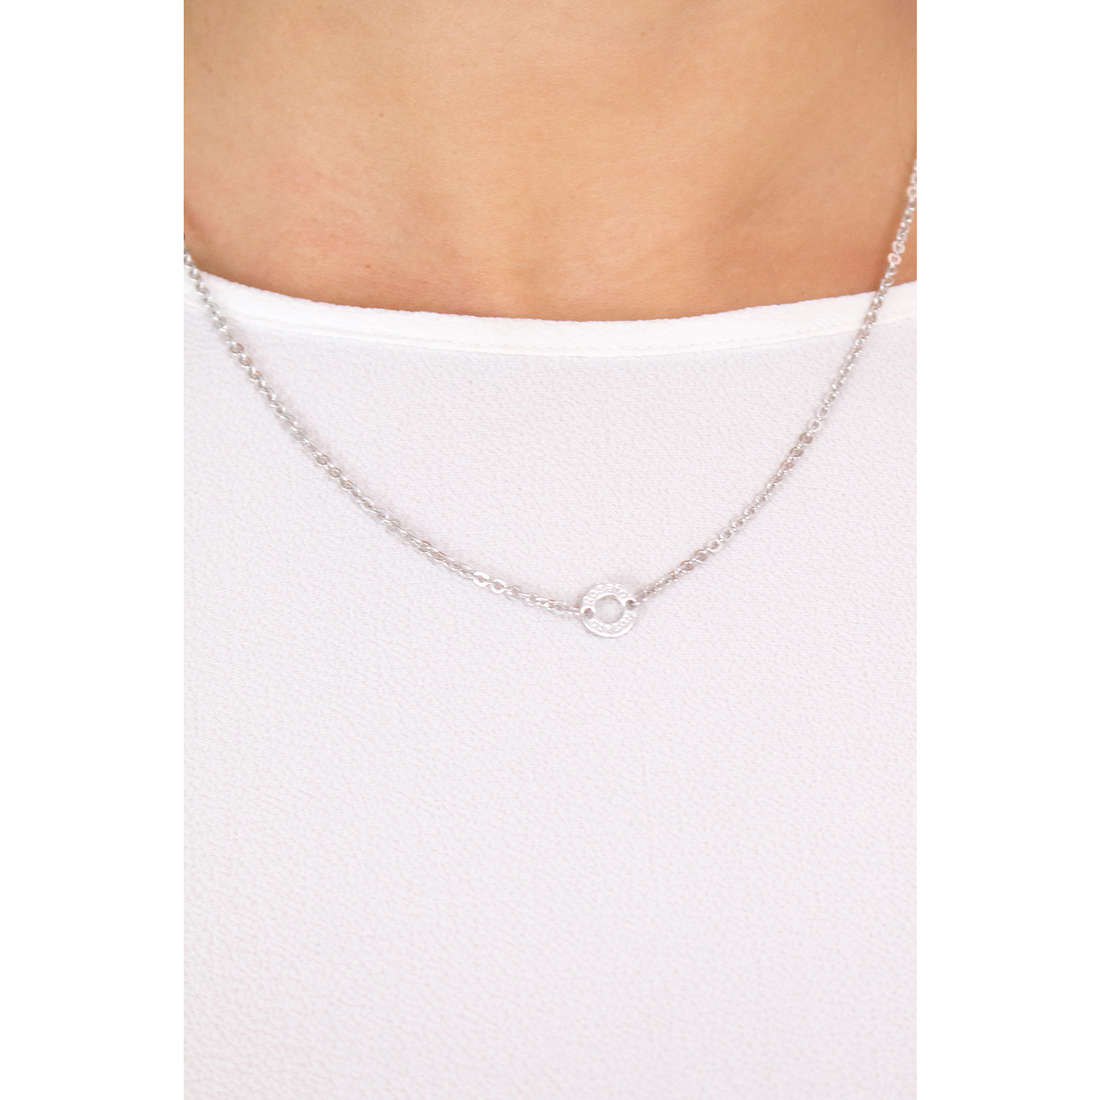 Rosato necklaces woman RCL01 wearing